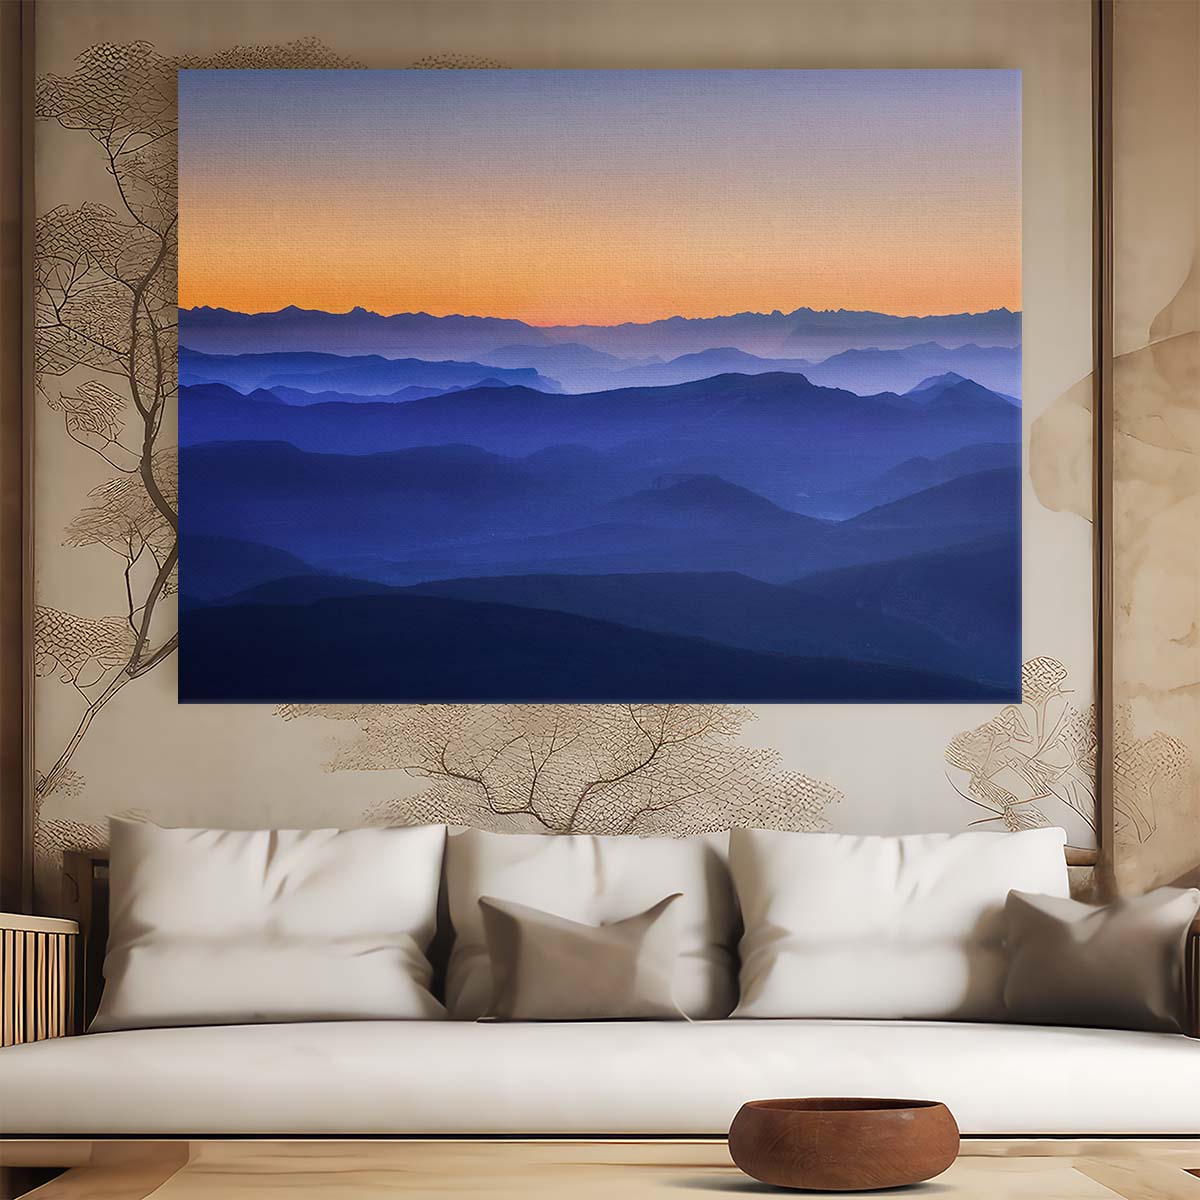 Misty Blue Mountain Layers Sunset View Wall Art by Luxuriance Designs. Made in USA.